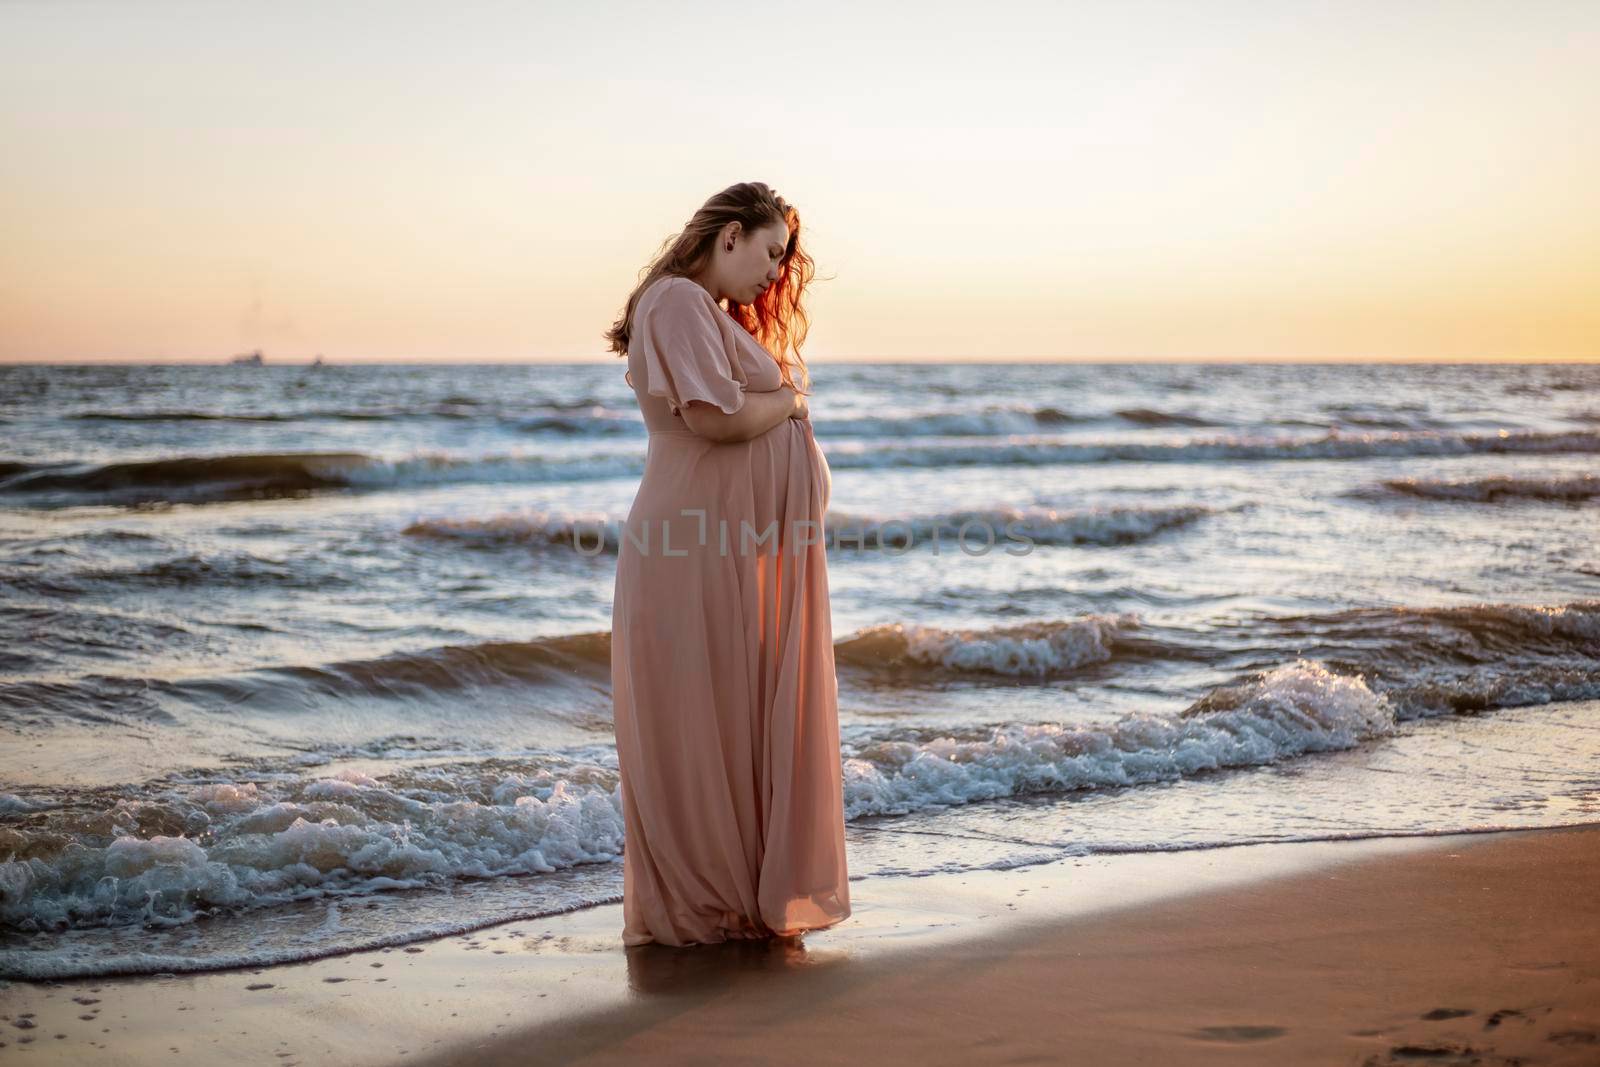 Young pregnant woman with a beautiful sea view on the background. Happy and calm pregnant woman with long hair and pink dress standig on the beach. Romantic view, ocean, sunset, maternity. by creativebird